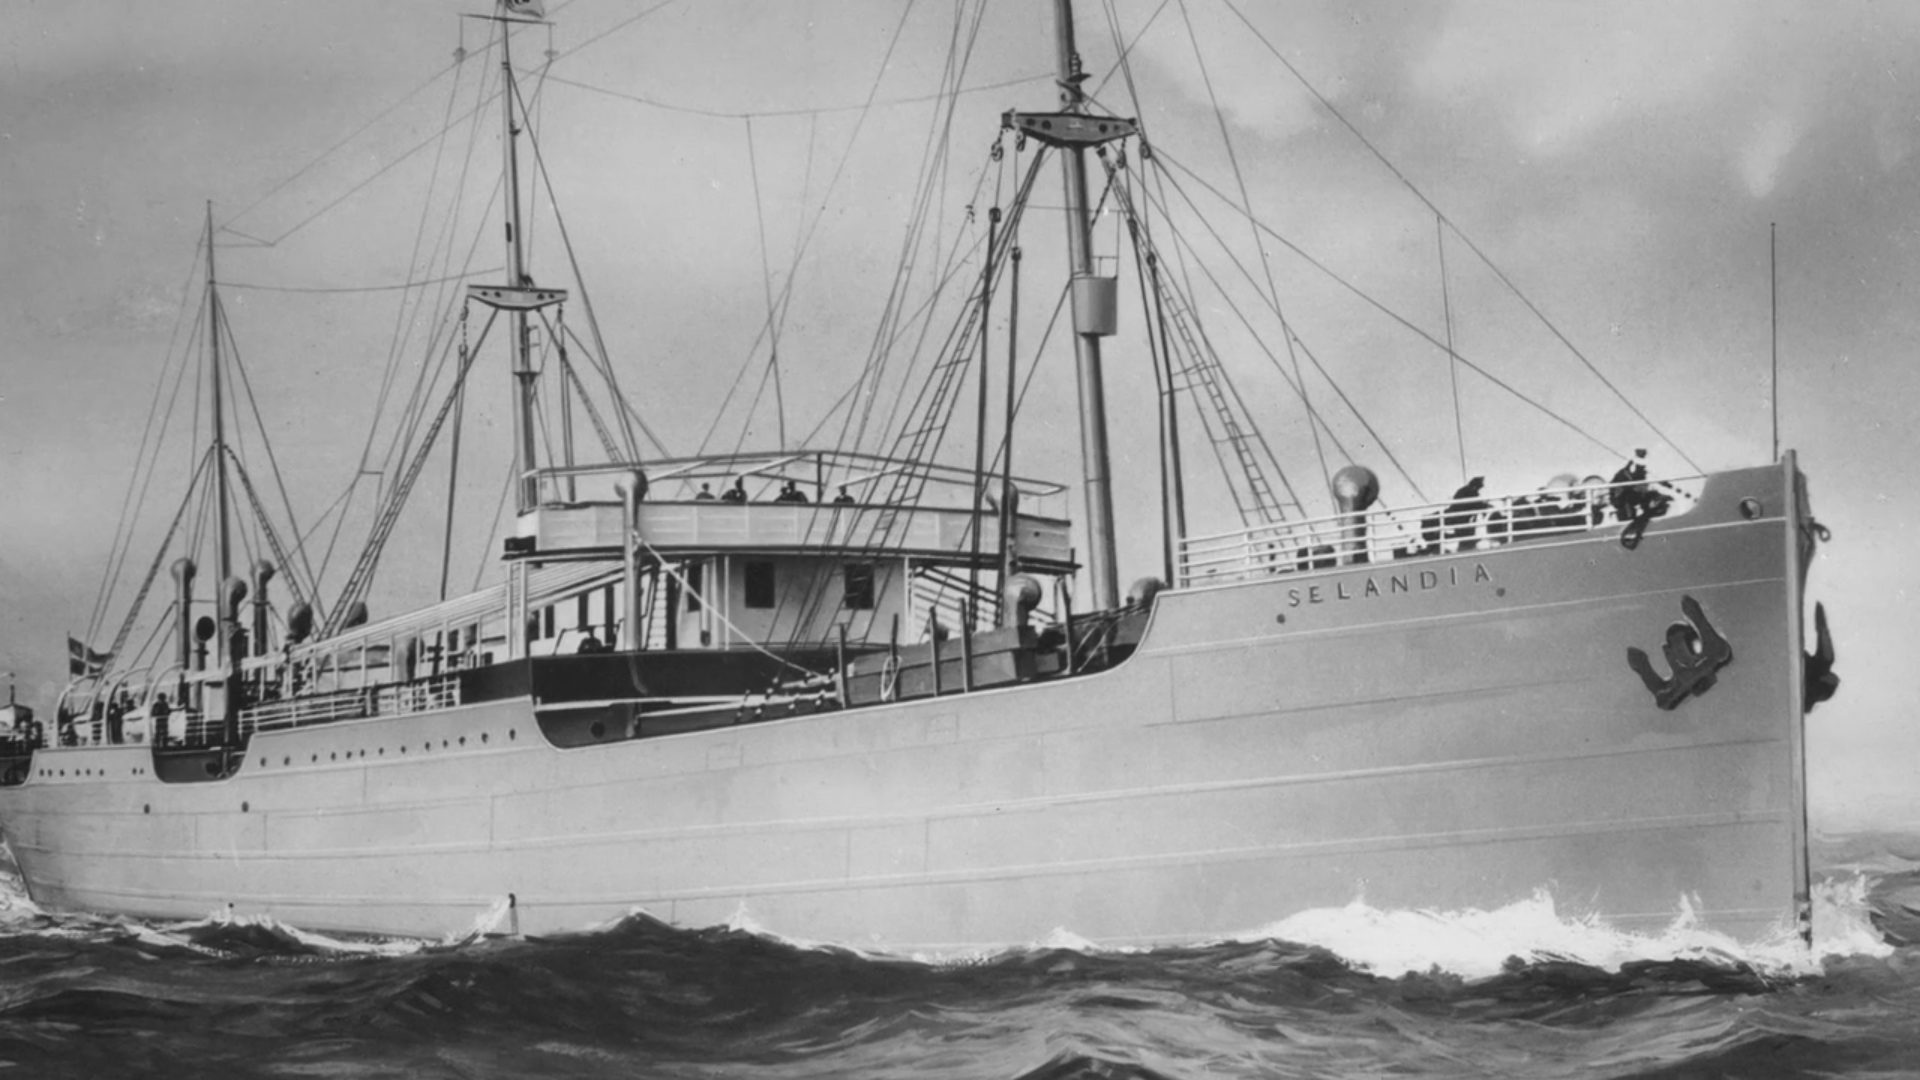 Selandia – The Ship That Changed the World